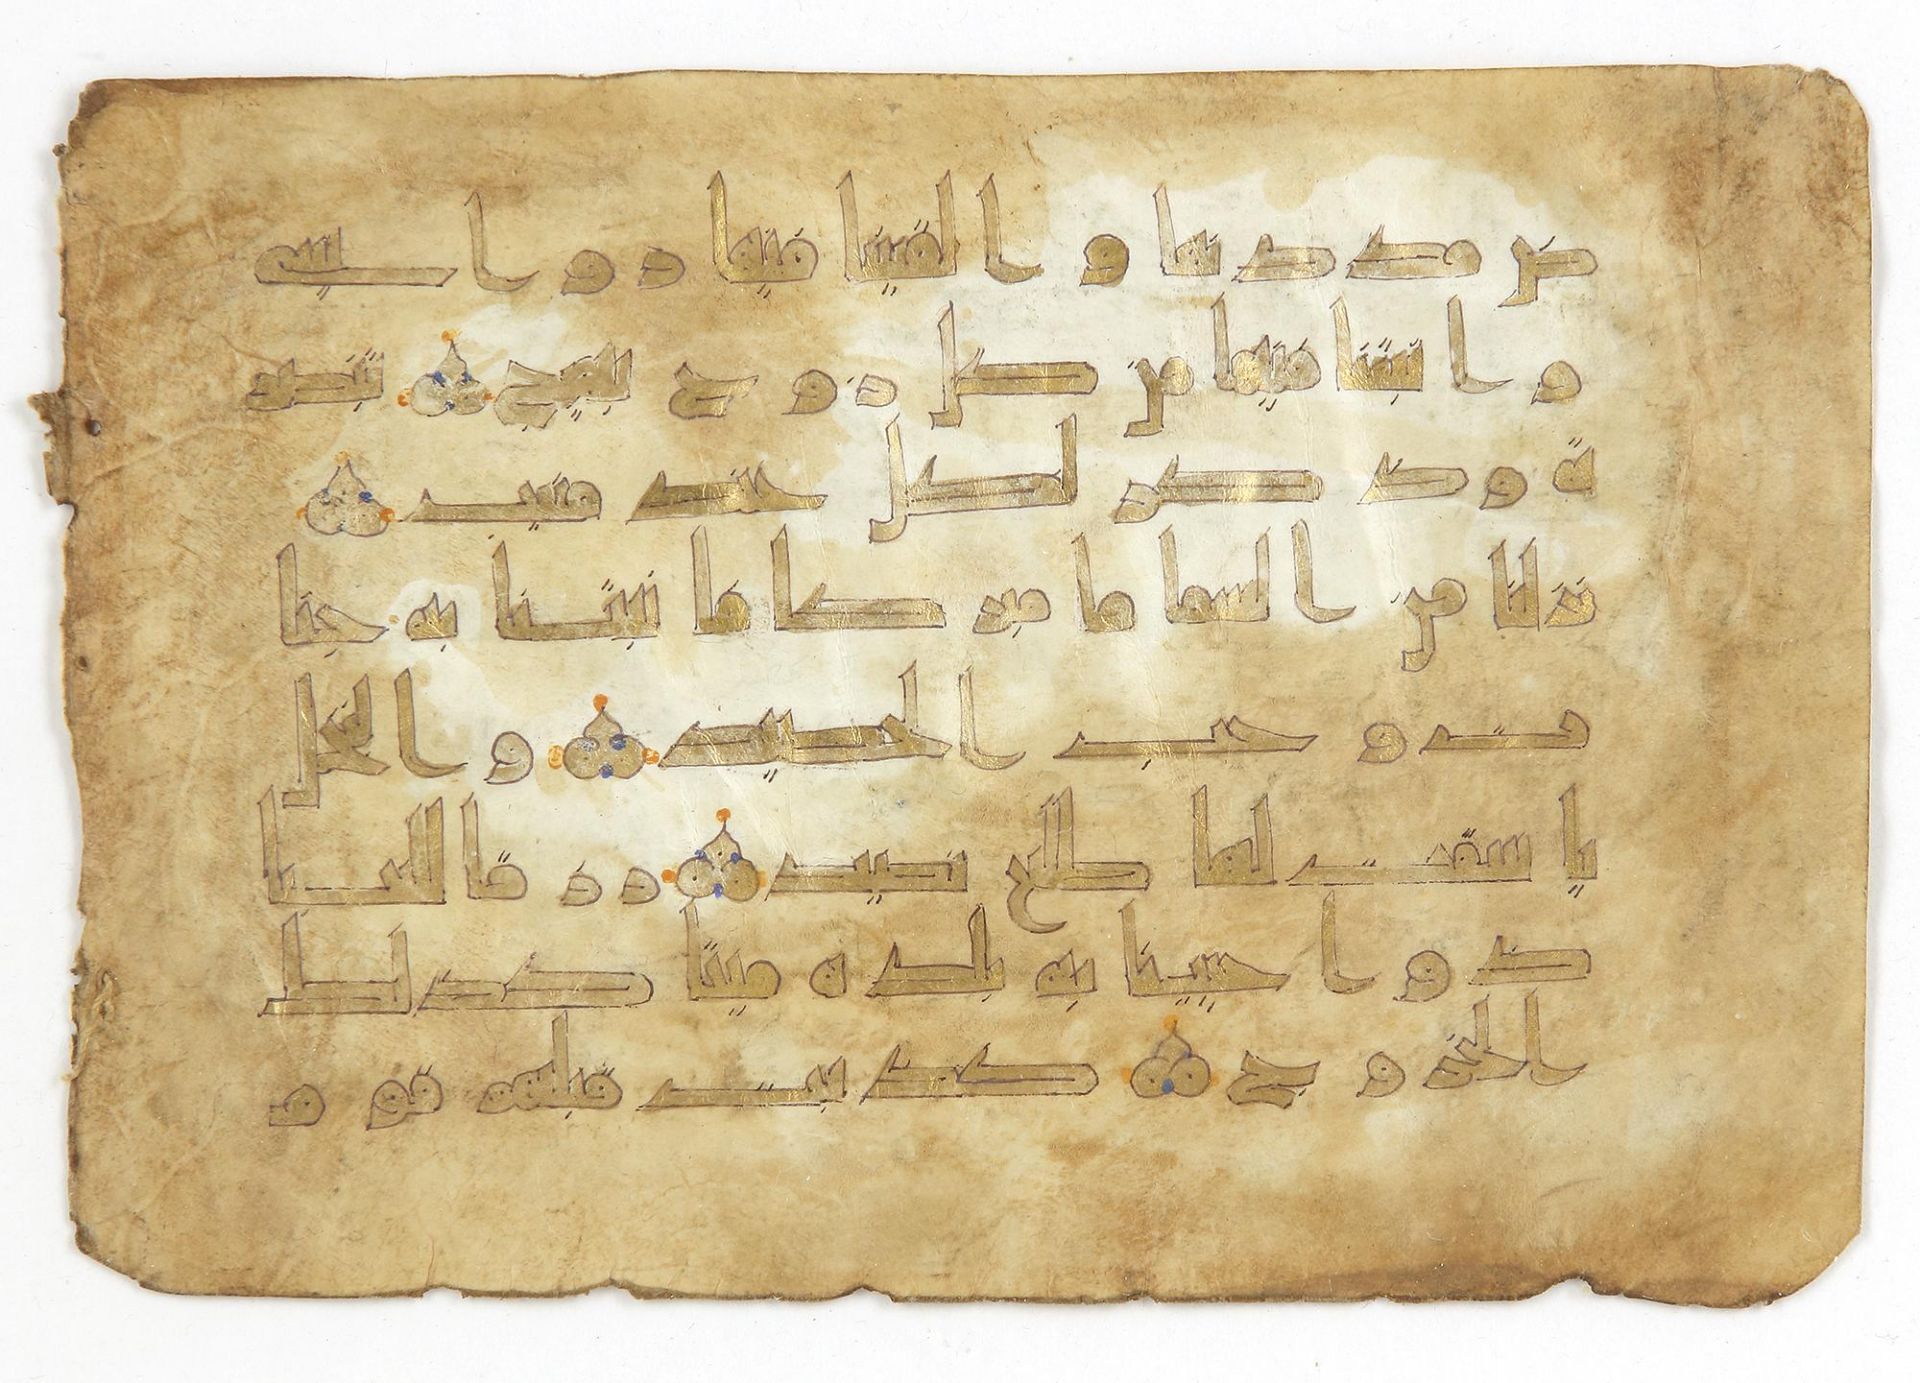 A GOLD QURAN KUFIC FOLIO, NORTH AFRICA, 9TH-10TH CENTURY - Image 4 of 4